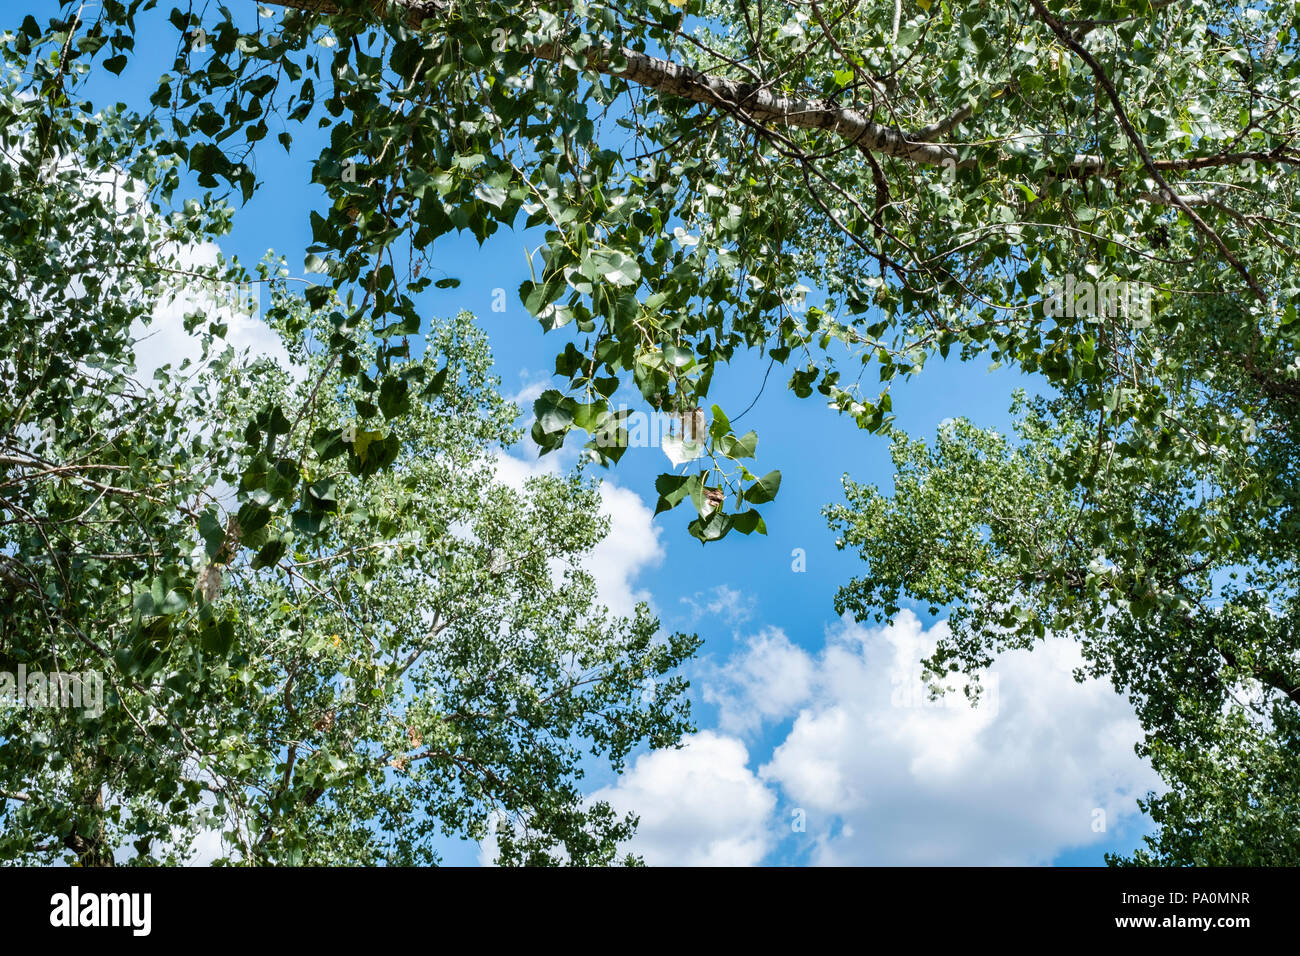 Looking up through branches and leaves of a Cottonwood tree in the summer. Populus deltoides, known as Eastern cottonwood. Kansas, USA. Stock Photo